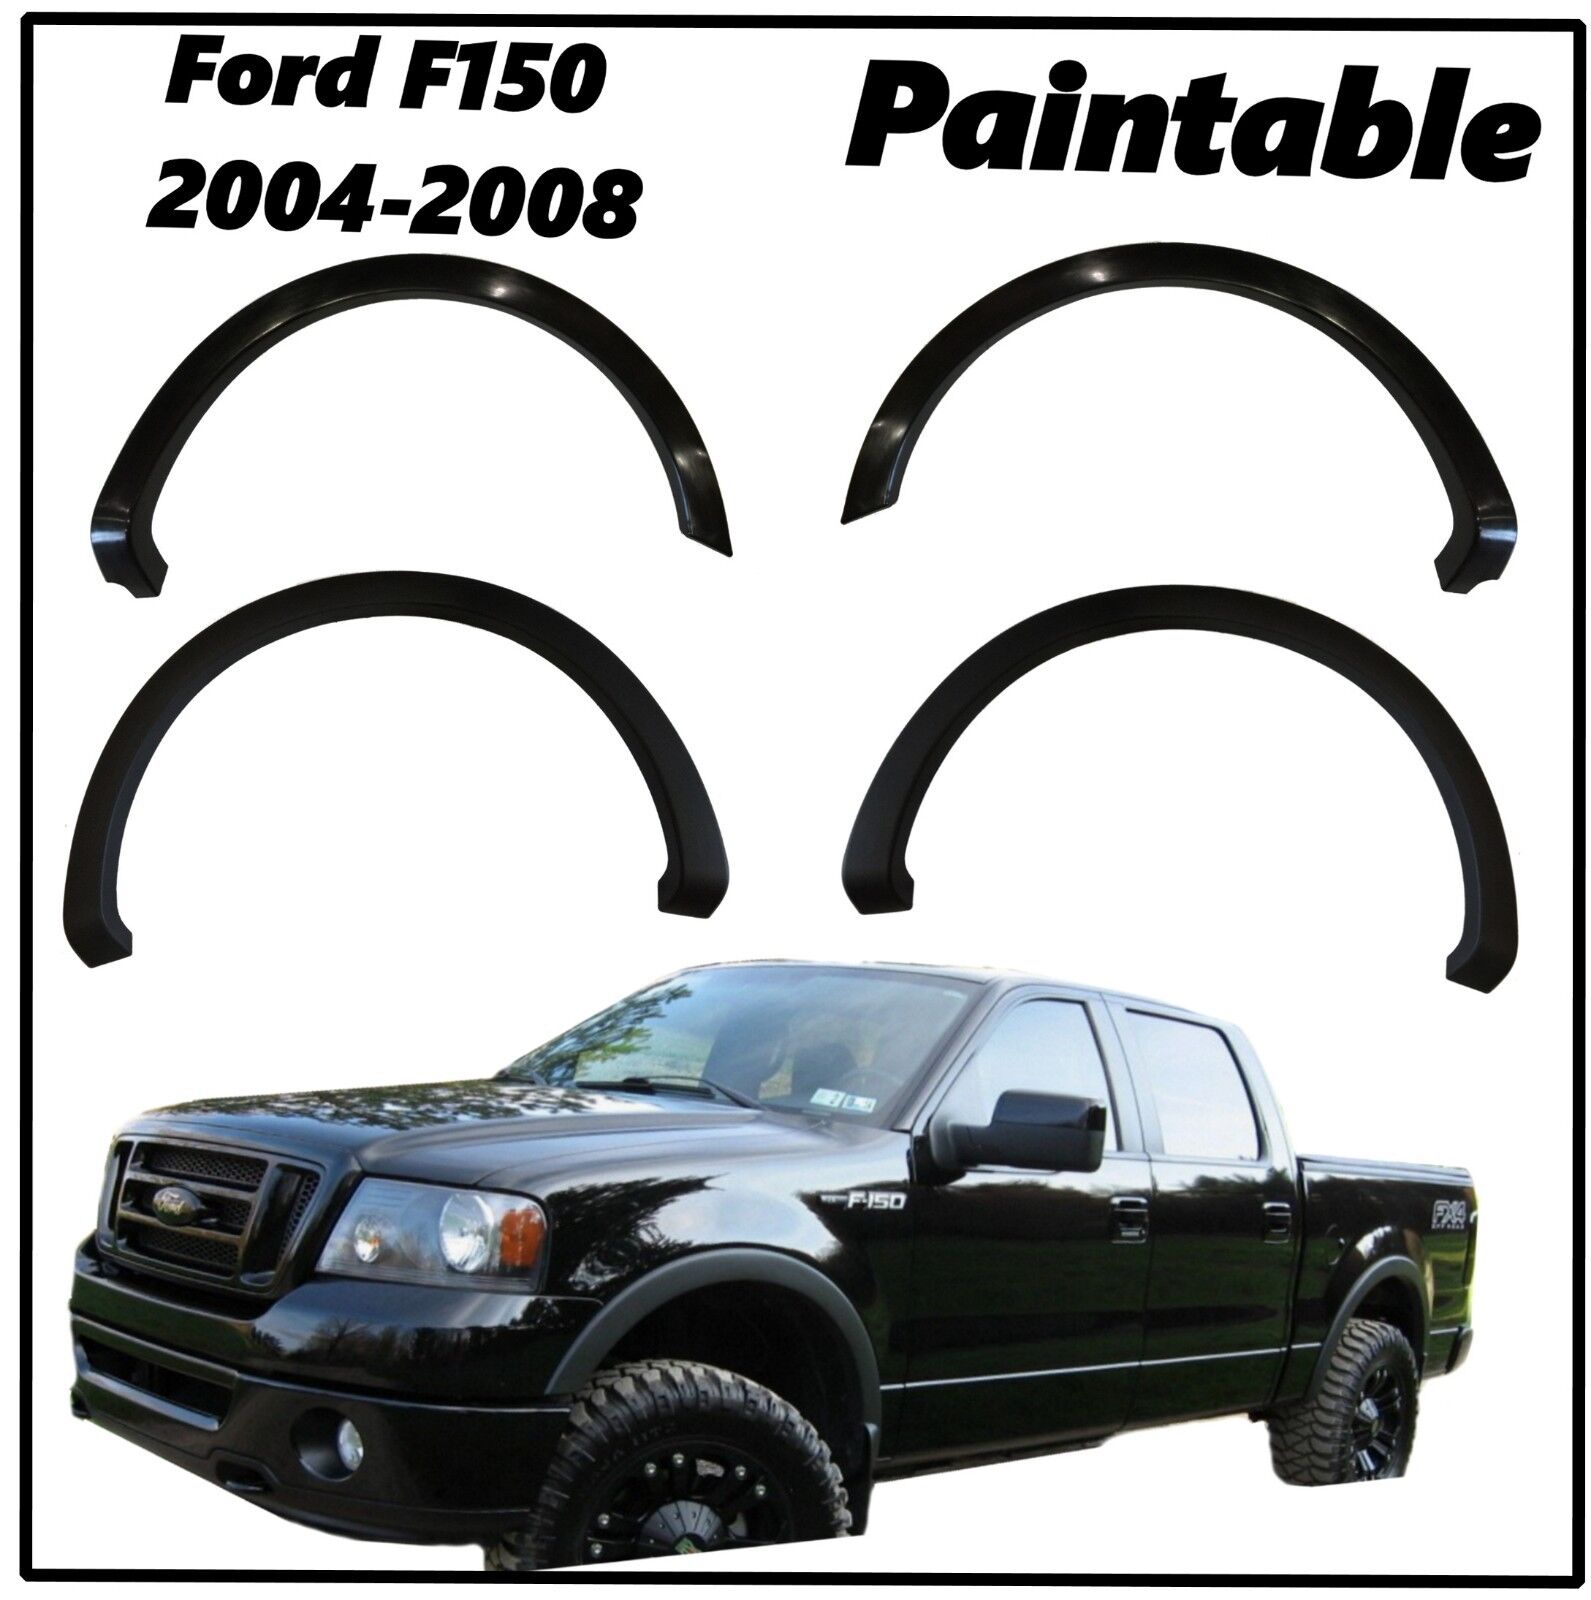 FENDER FLARES FACTORY OE STYLE  2004 - 2008 FORD F150 PICK UP 4PCS Paintable